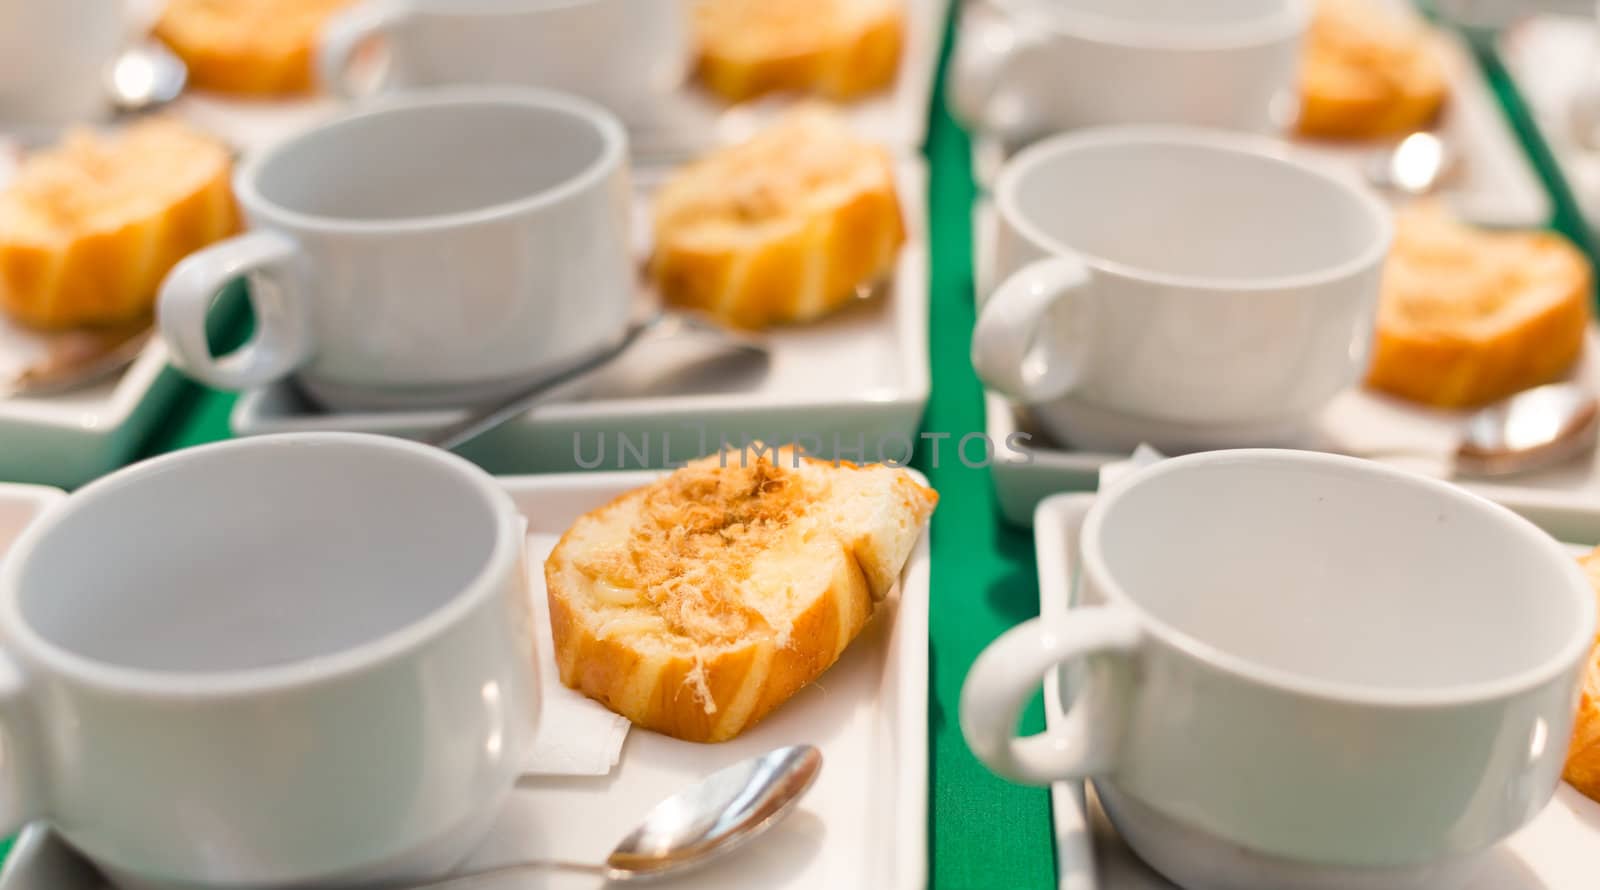 many fried Bread with dried shredded pork Thai dessert and white coffee cup